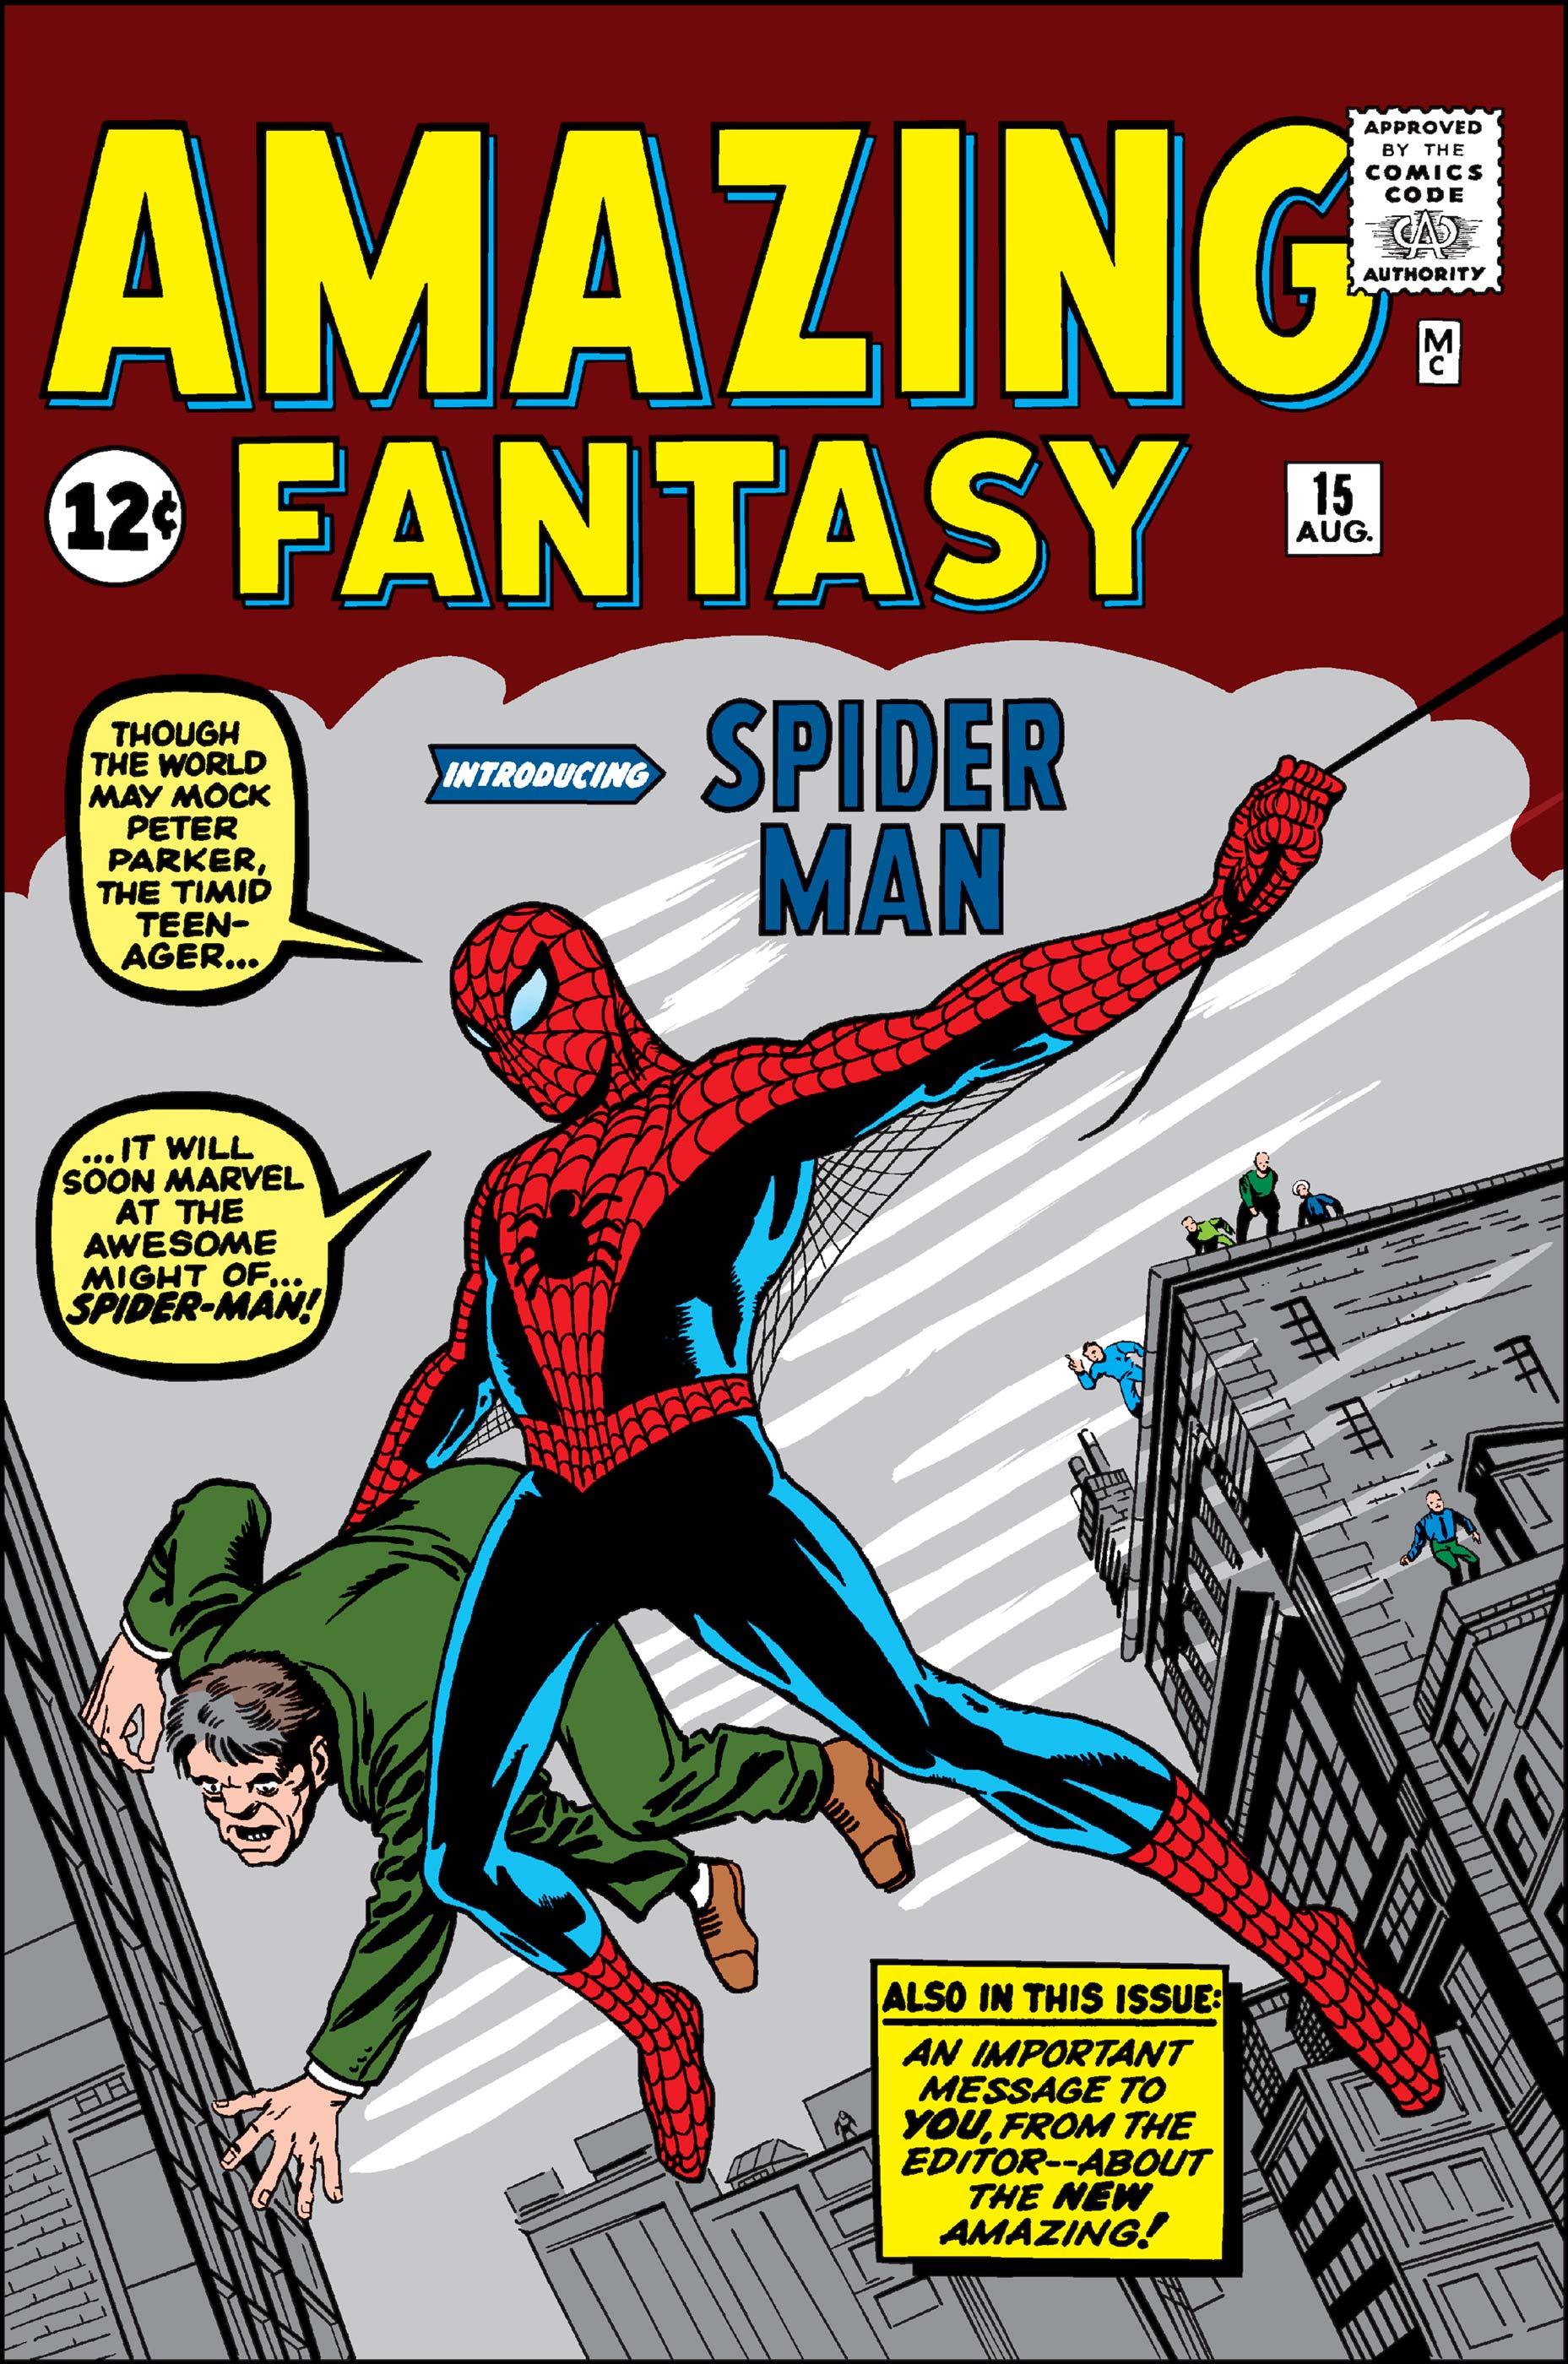 Amazing fantasy 15 pages